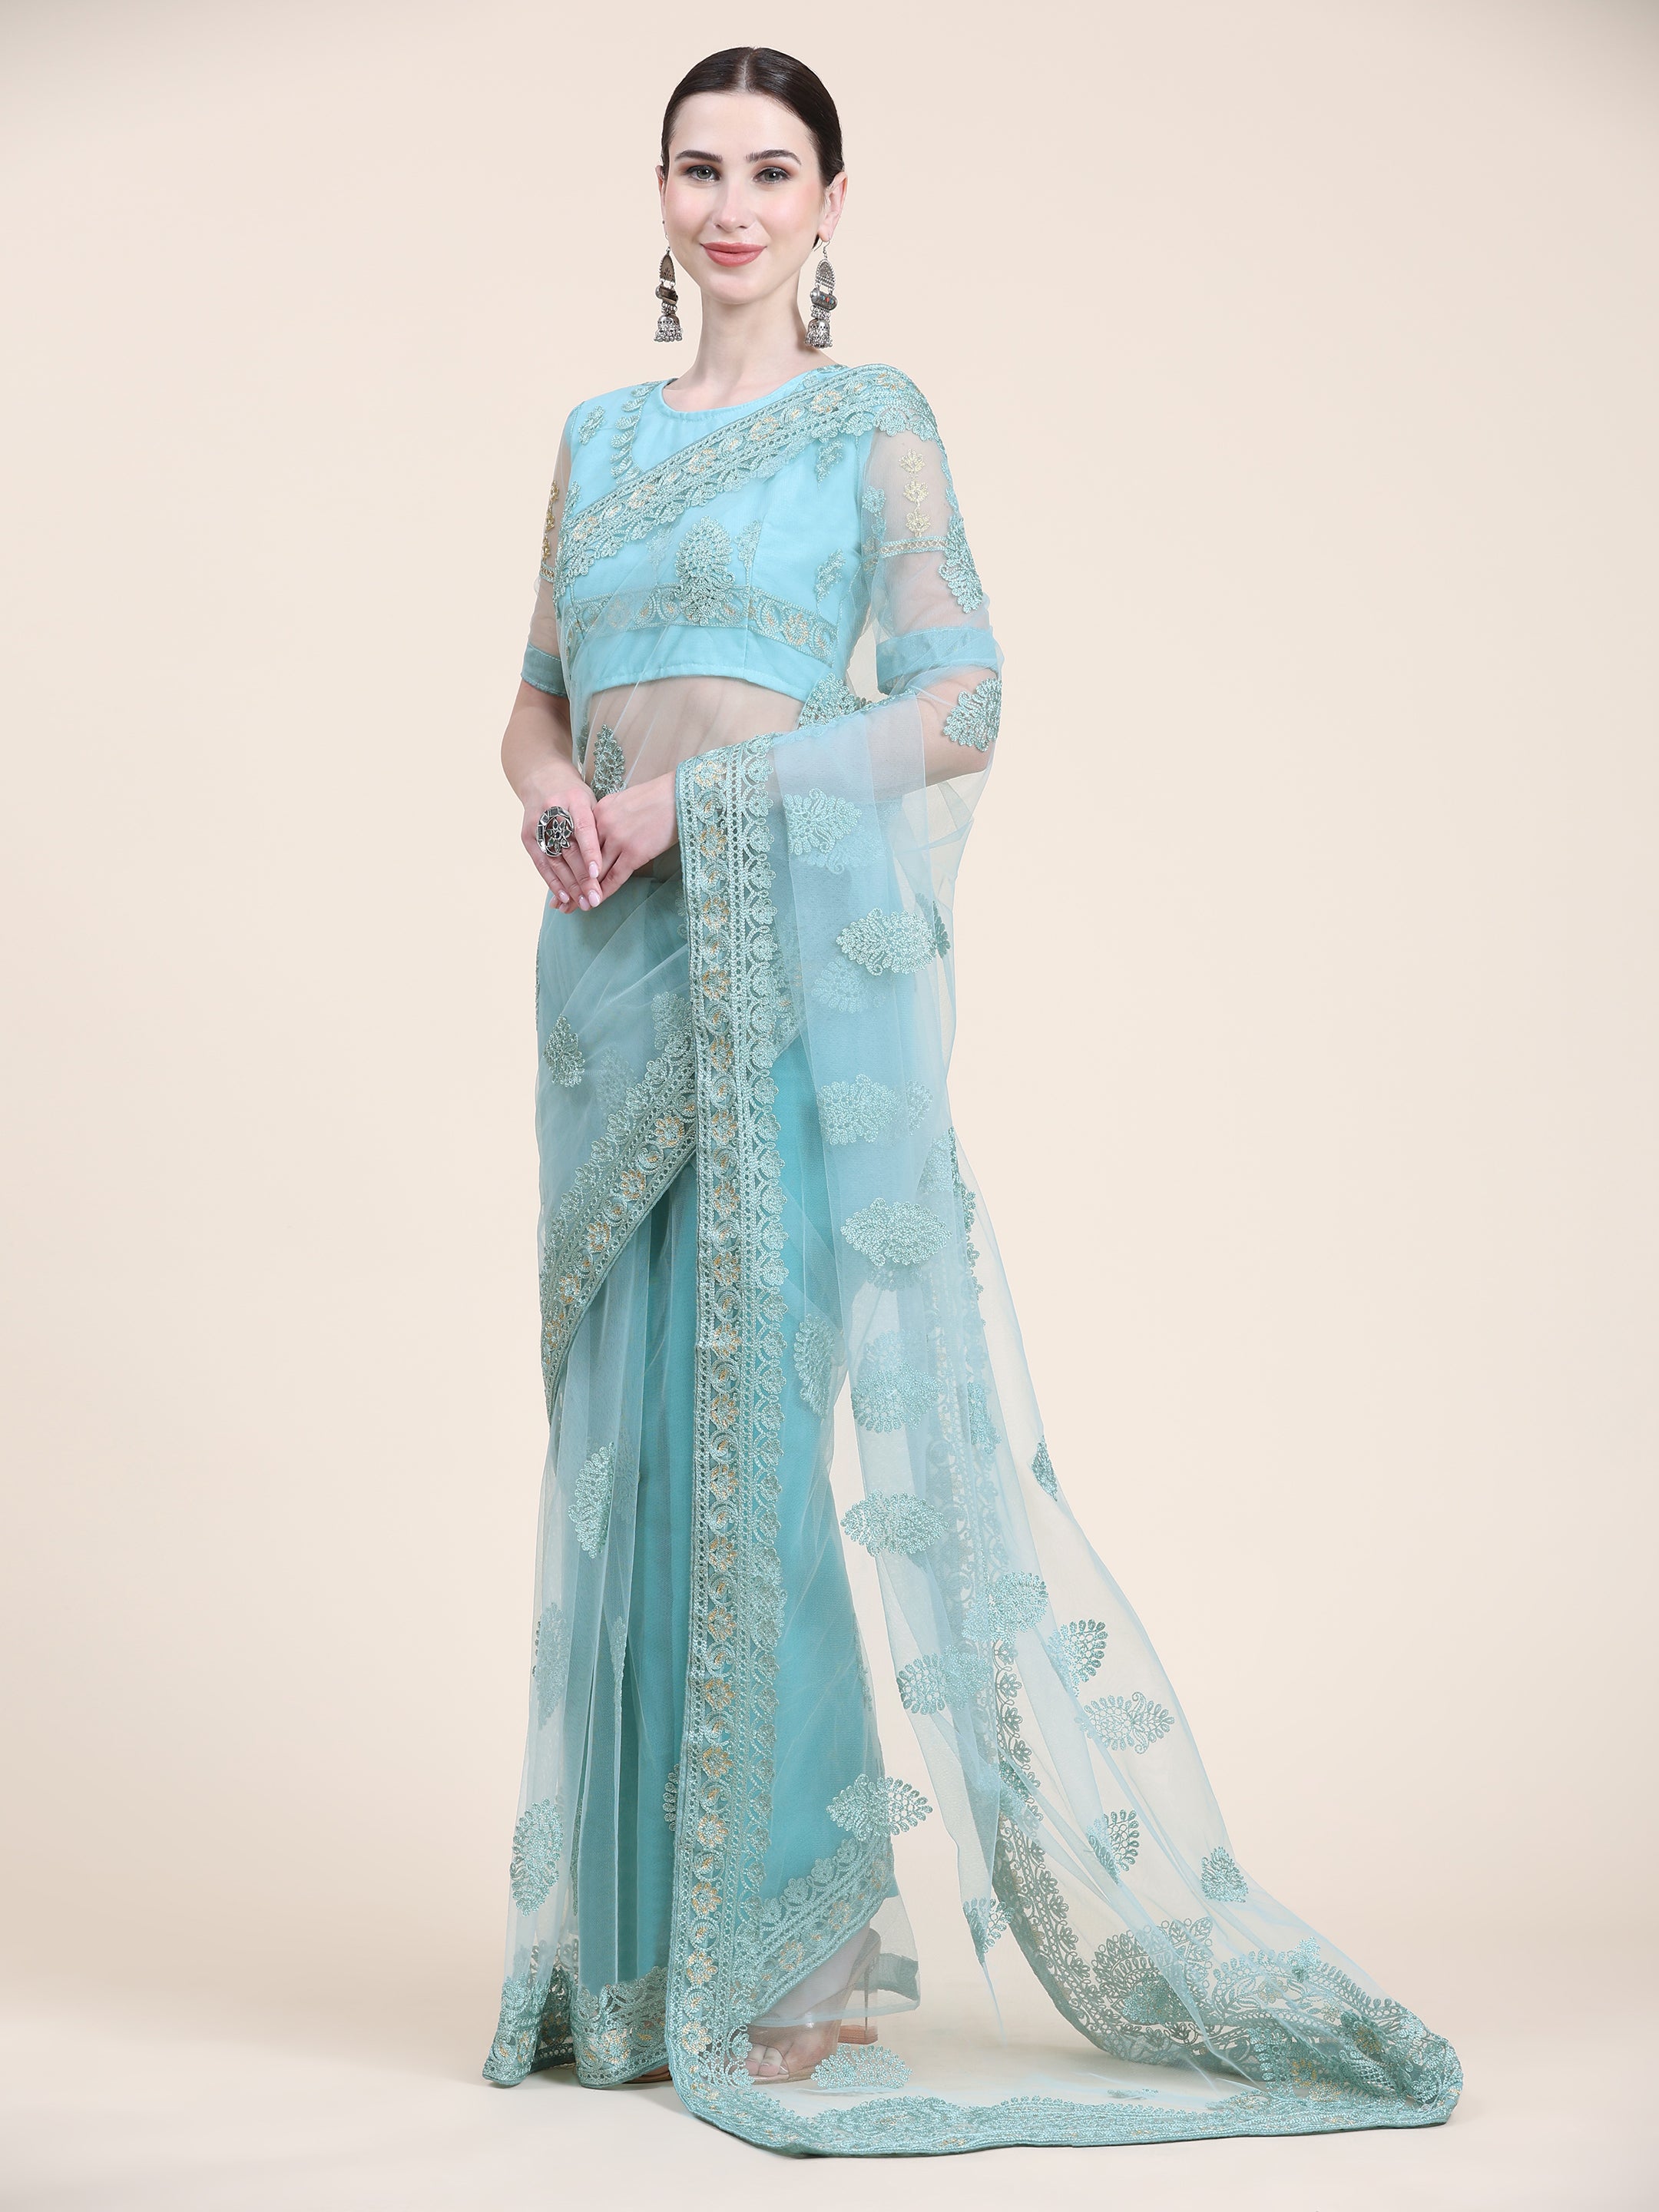 Women's Self Color Thread Embroidery Paty Wear Contemporary Net Saree With Blouse Piece (Aqua Blue) - NIMIDHYA